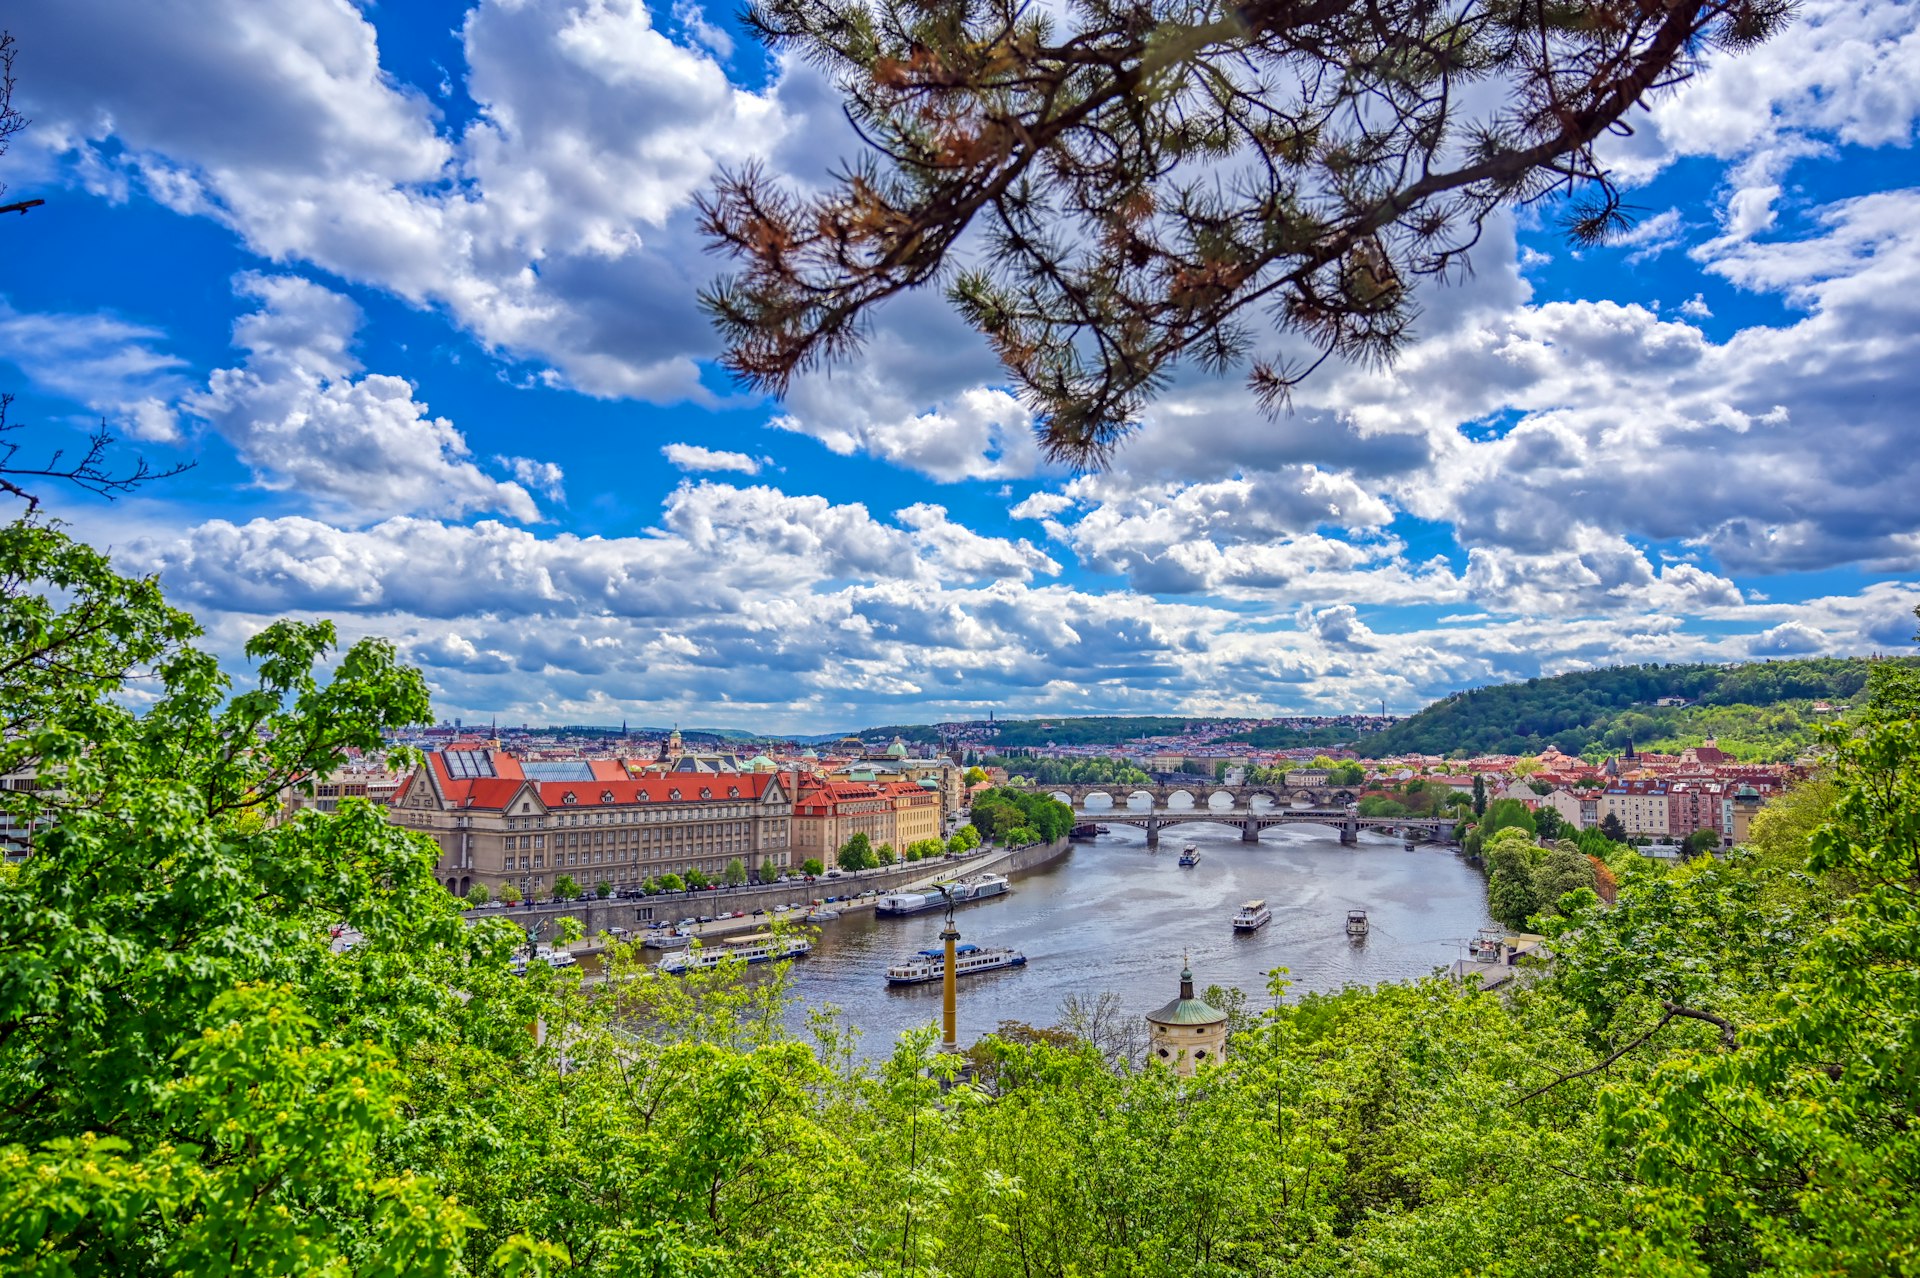 A scenic shot of a river flowing through a city center on a sunny day, with perfect white fluffy clouds in a blue sky